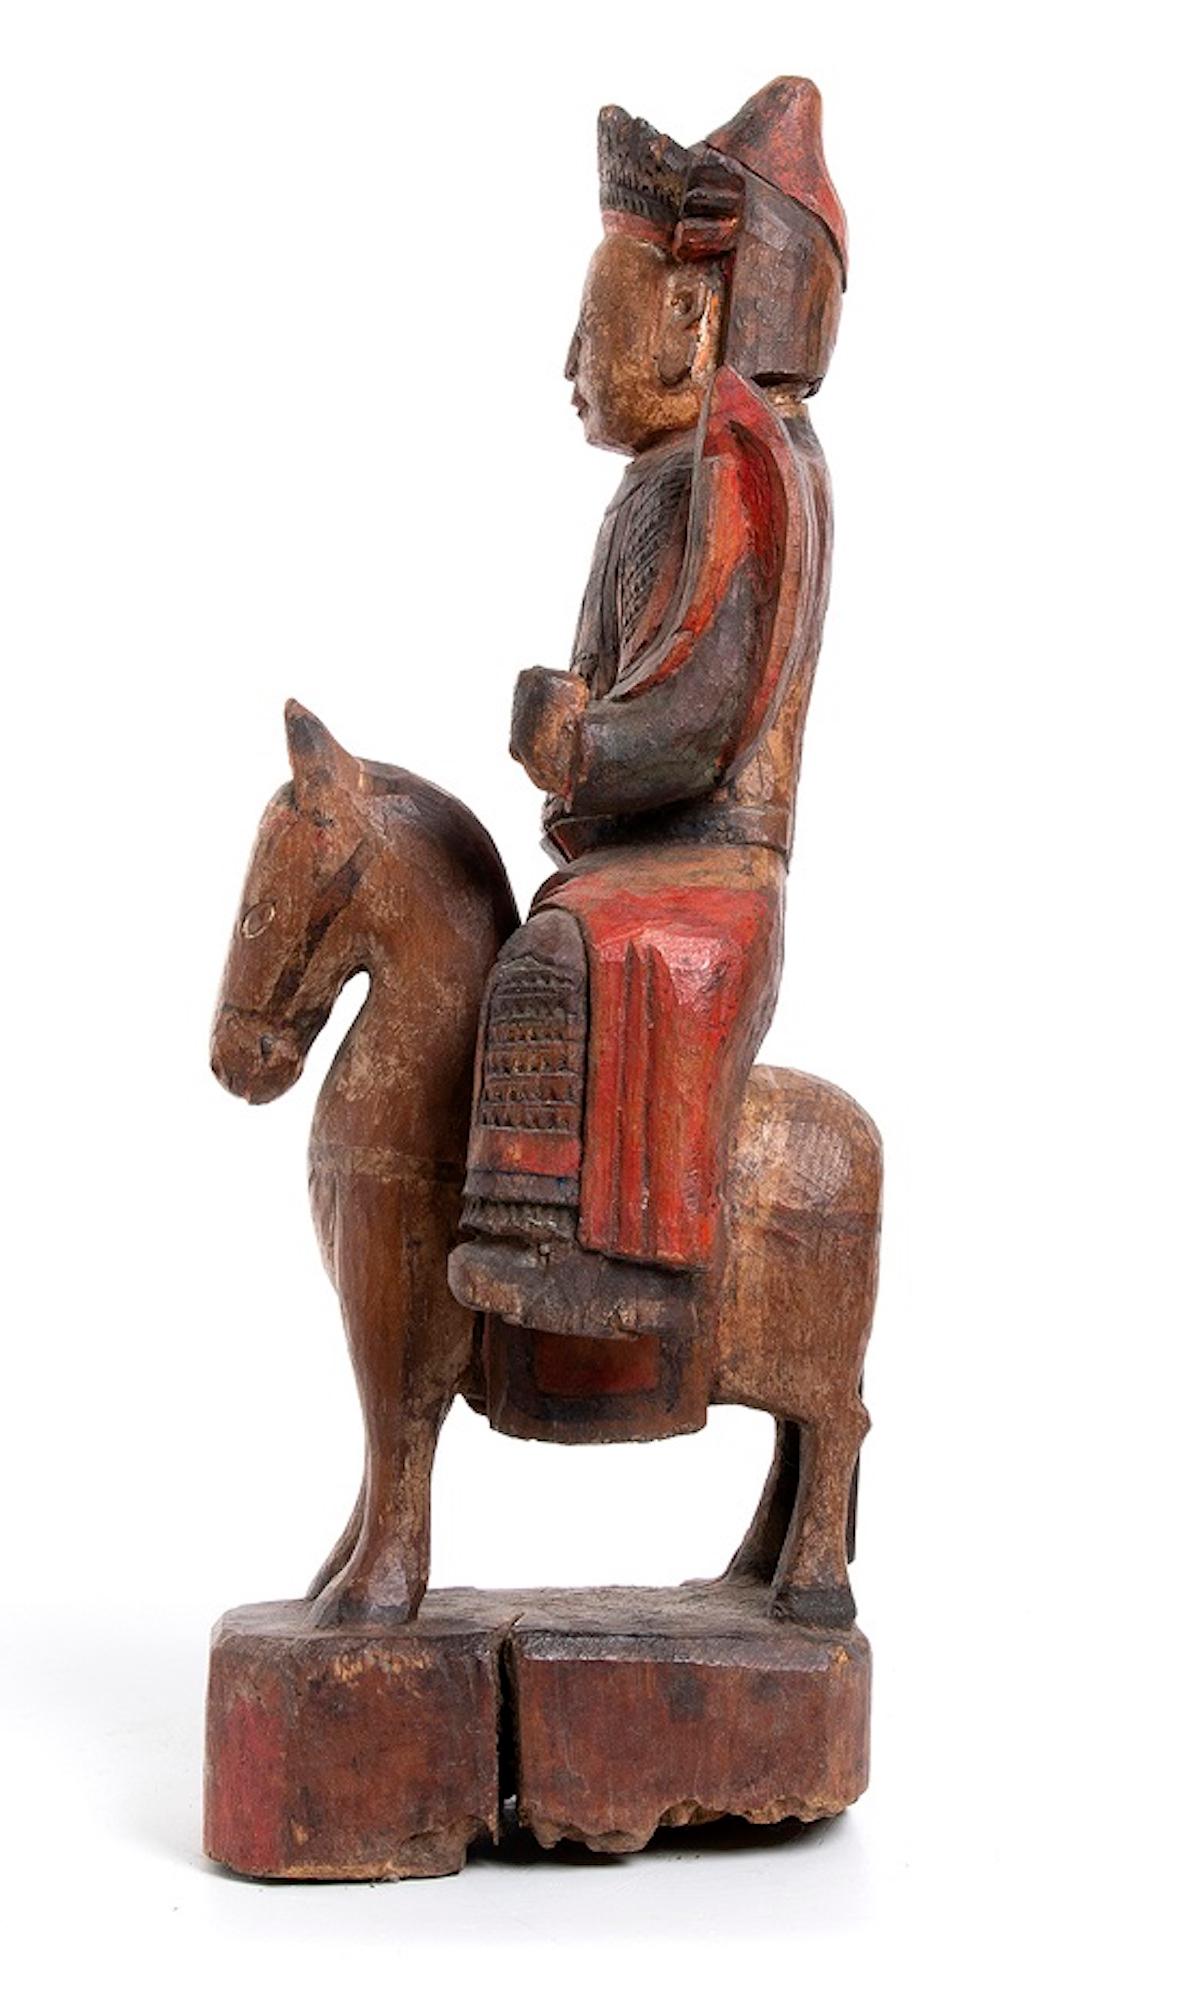 Deity on horse, Qing dynasty, China is an original artwork realized in China during the Qing dynasty.

Handmade Chinese painted wood.

Provenance: Private collection.

Good conditions. 

Small interesting painted wood work representing a